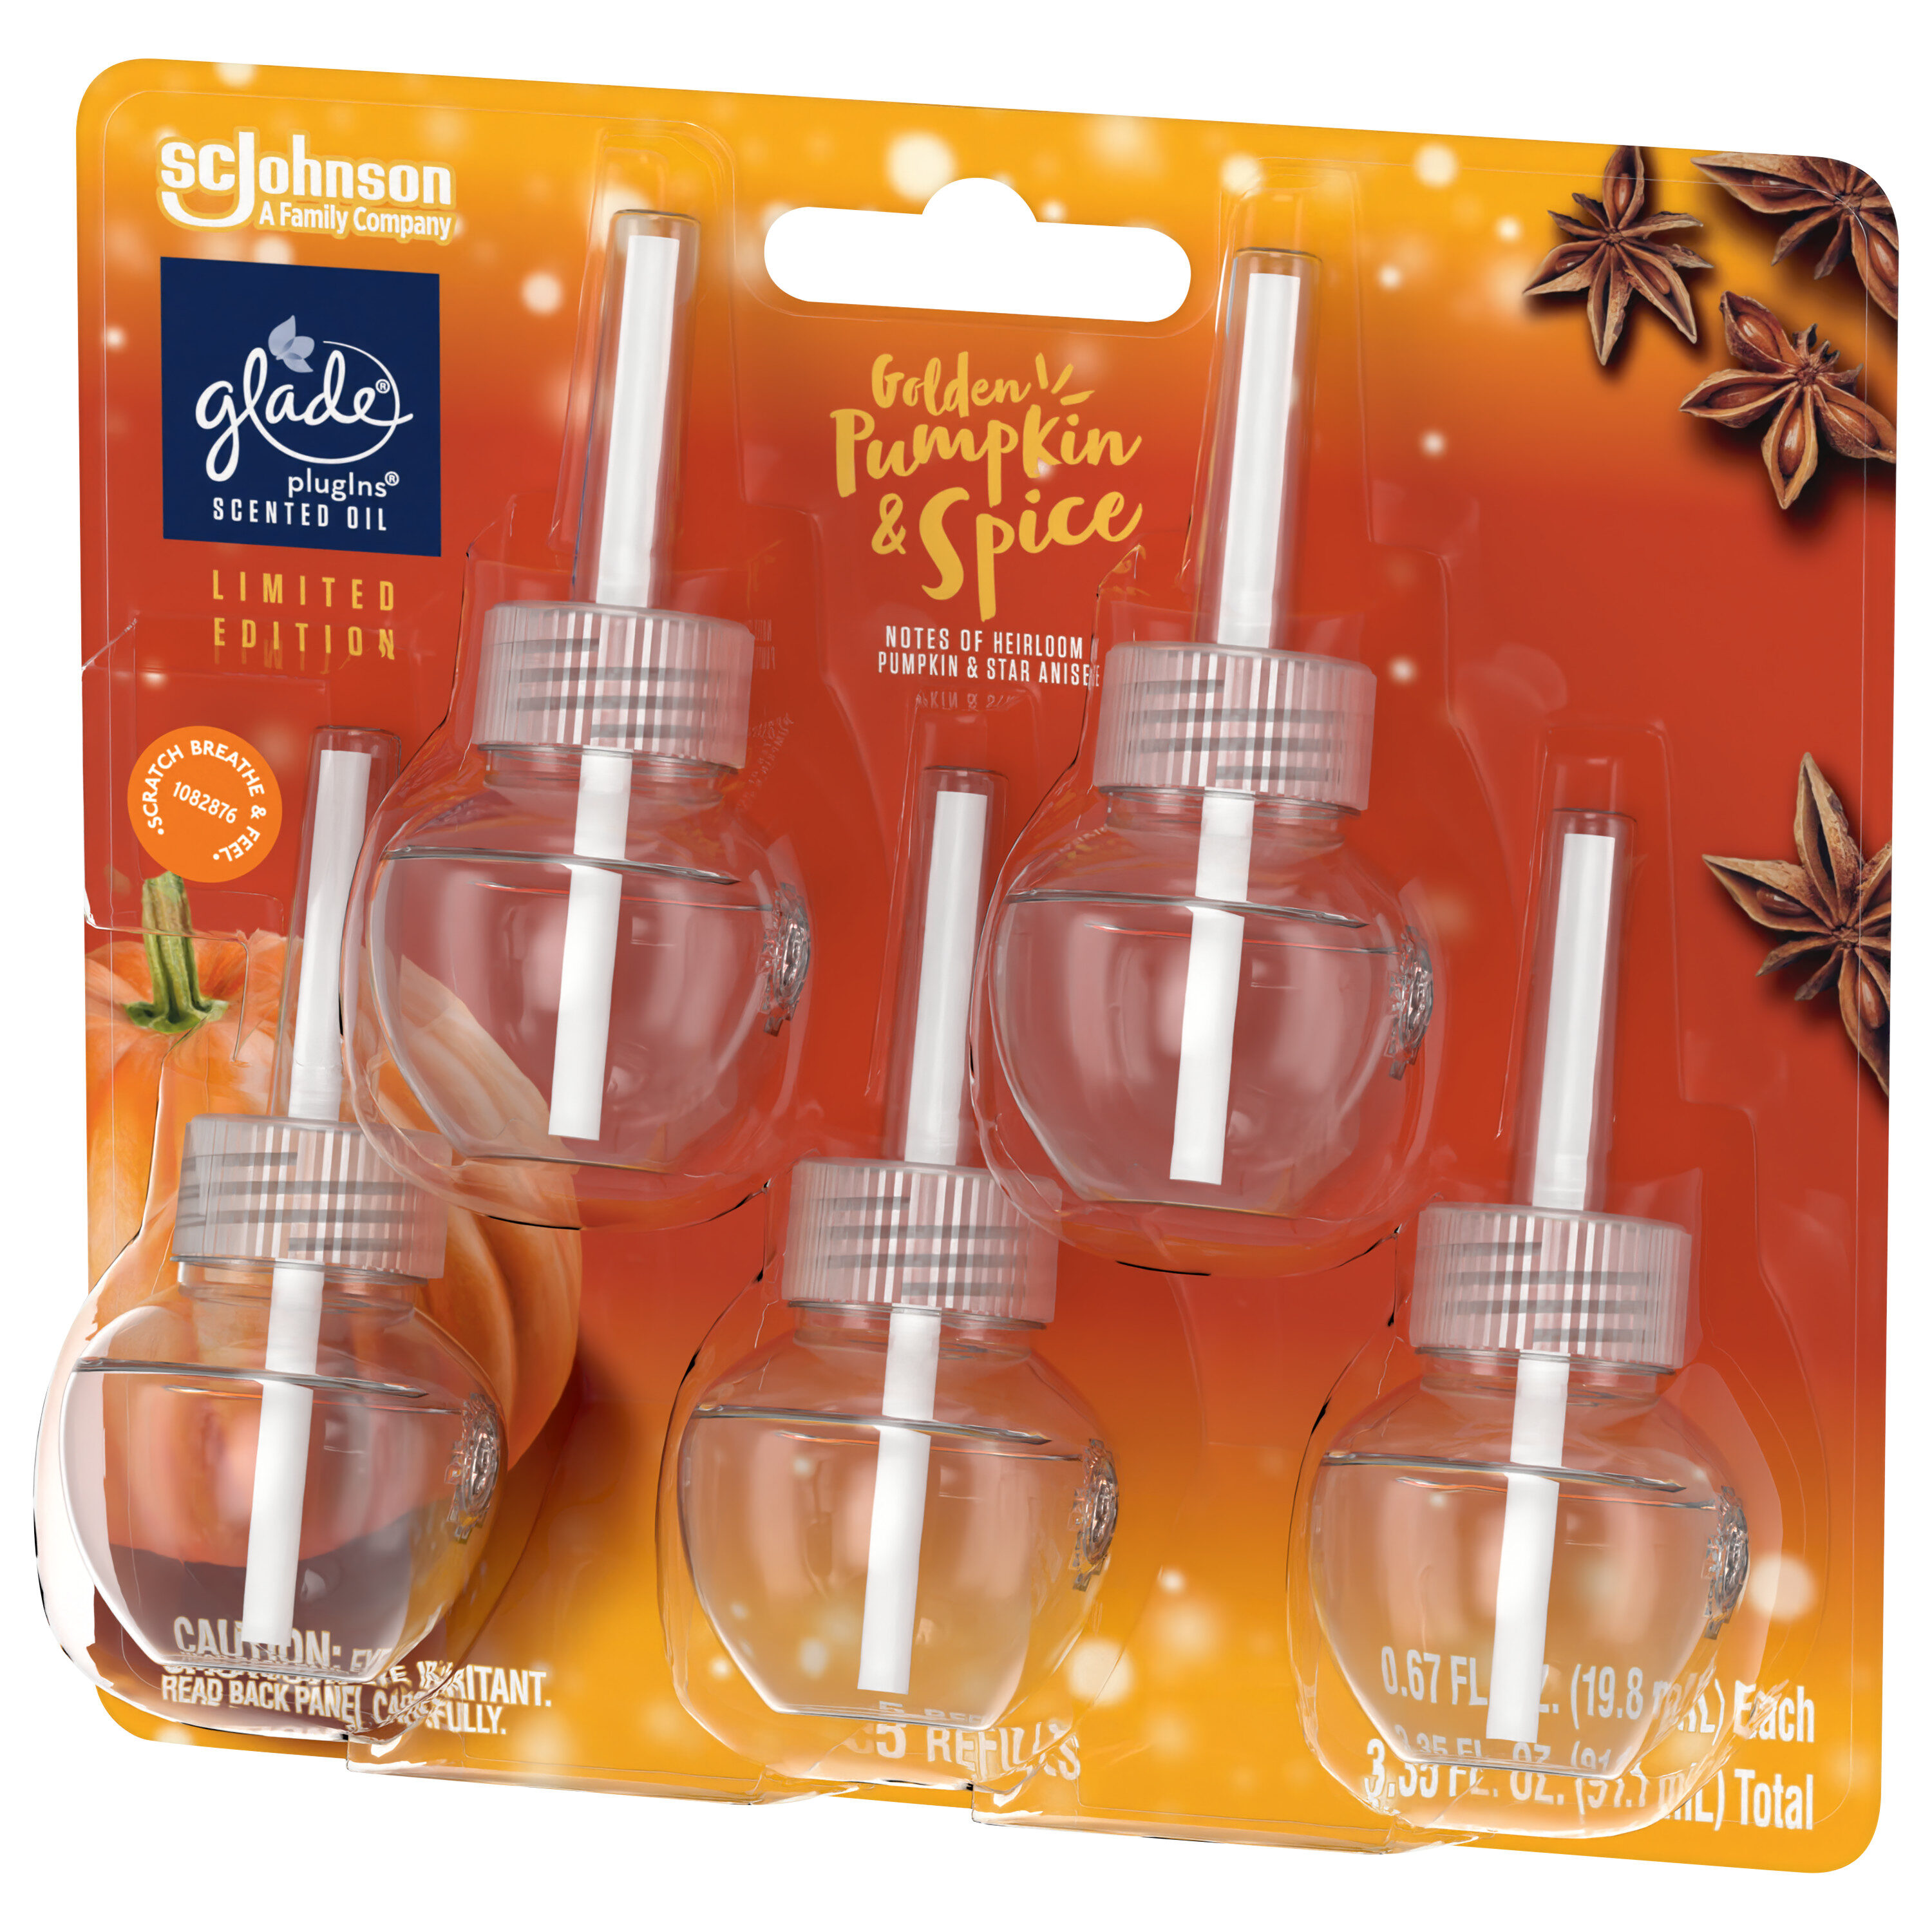 Glade Combo 3.35 fl. oz. Clean Linen Scented Oil Plug-In Air Freshener Refill (10-Count) 2-Pack, Clear